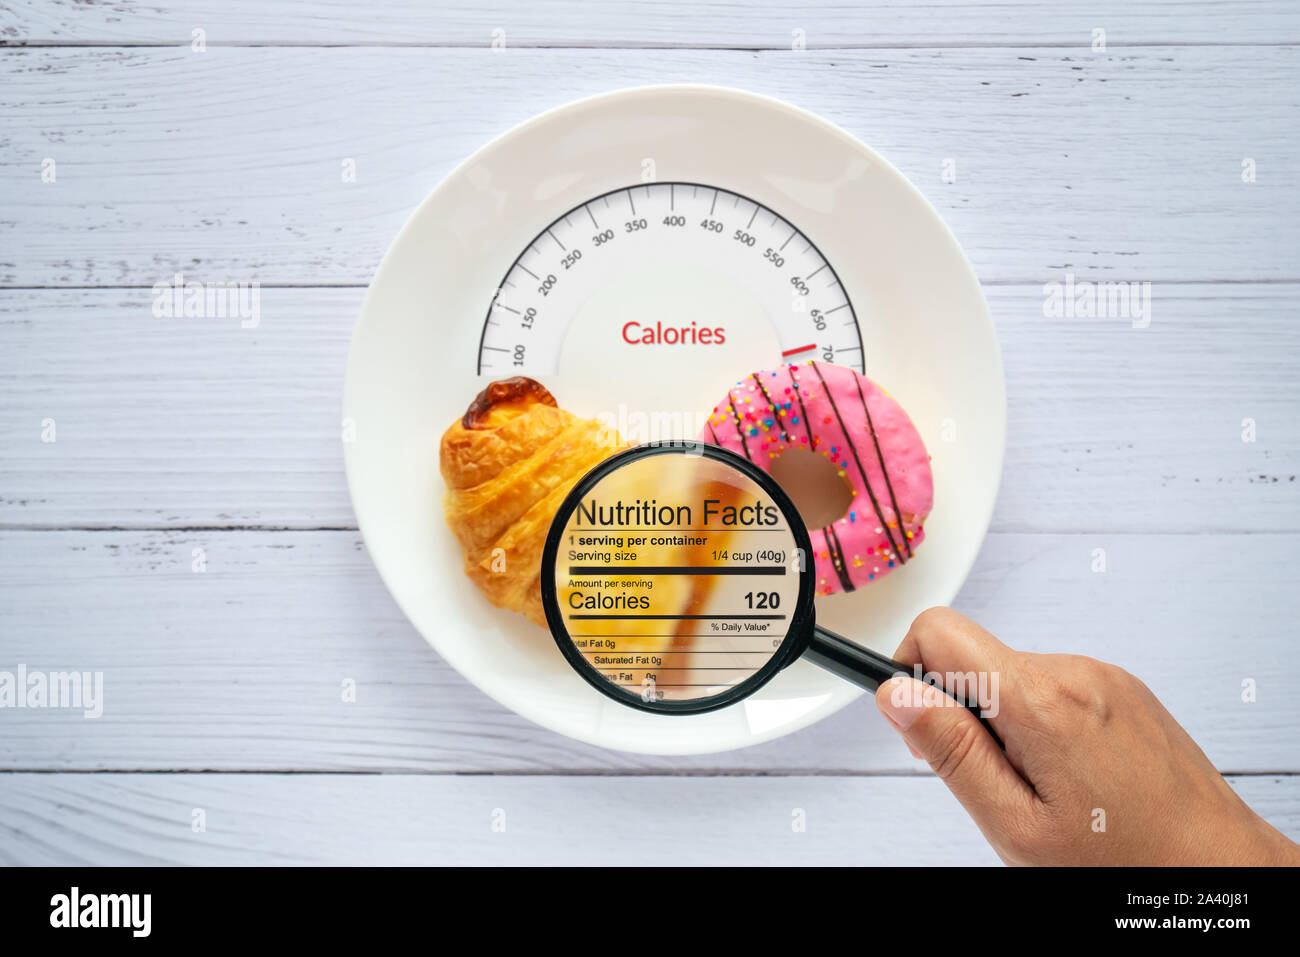 Calories counting, food control and consumer nutrition facts label concept. doughnut and croissant on white plate with tongue scales for Calories meas Stock Photo